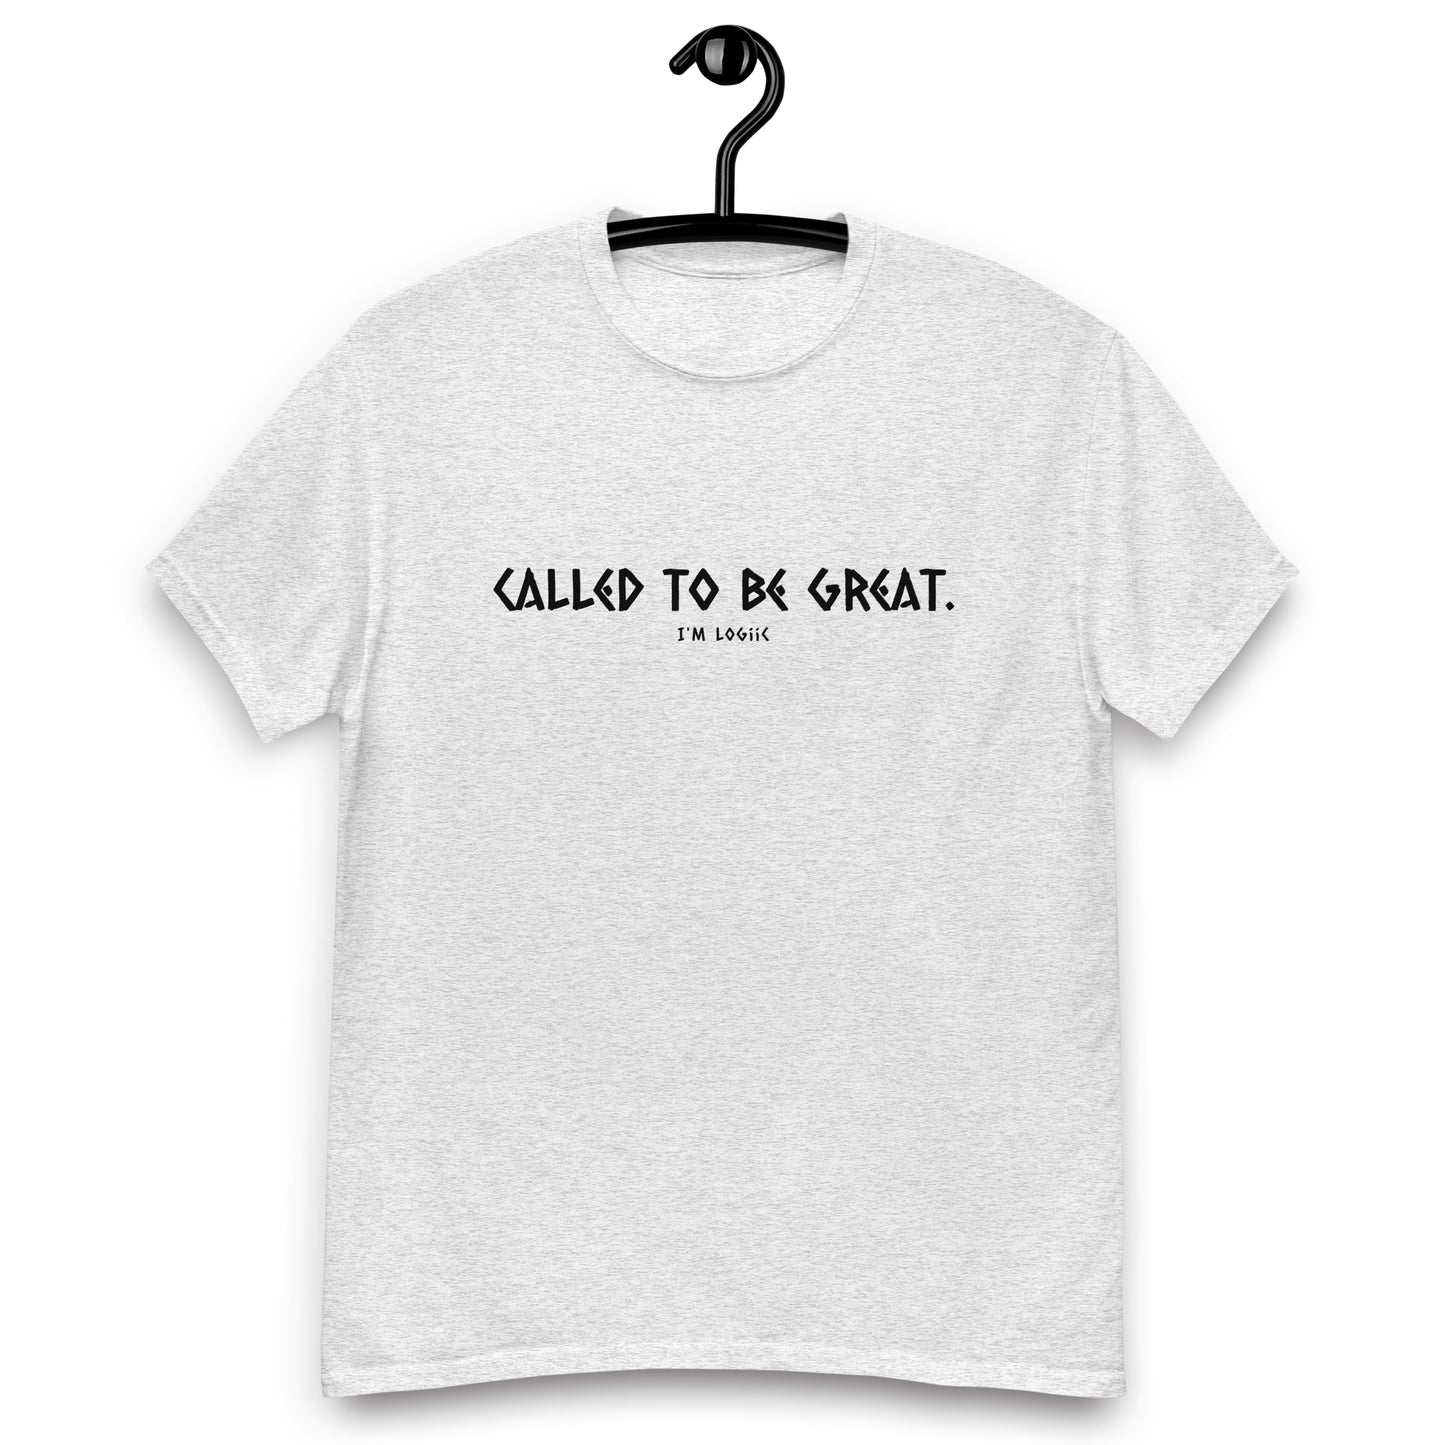 Called to be Great classic tee